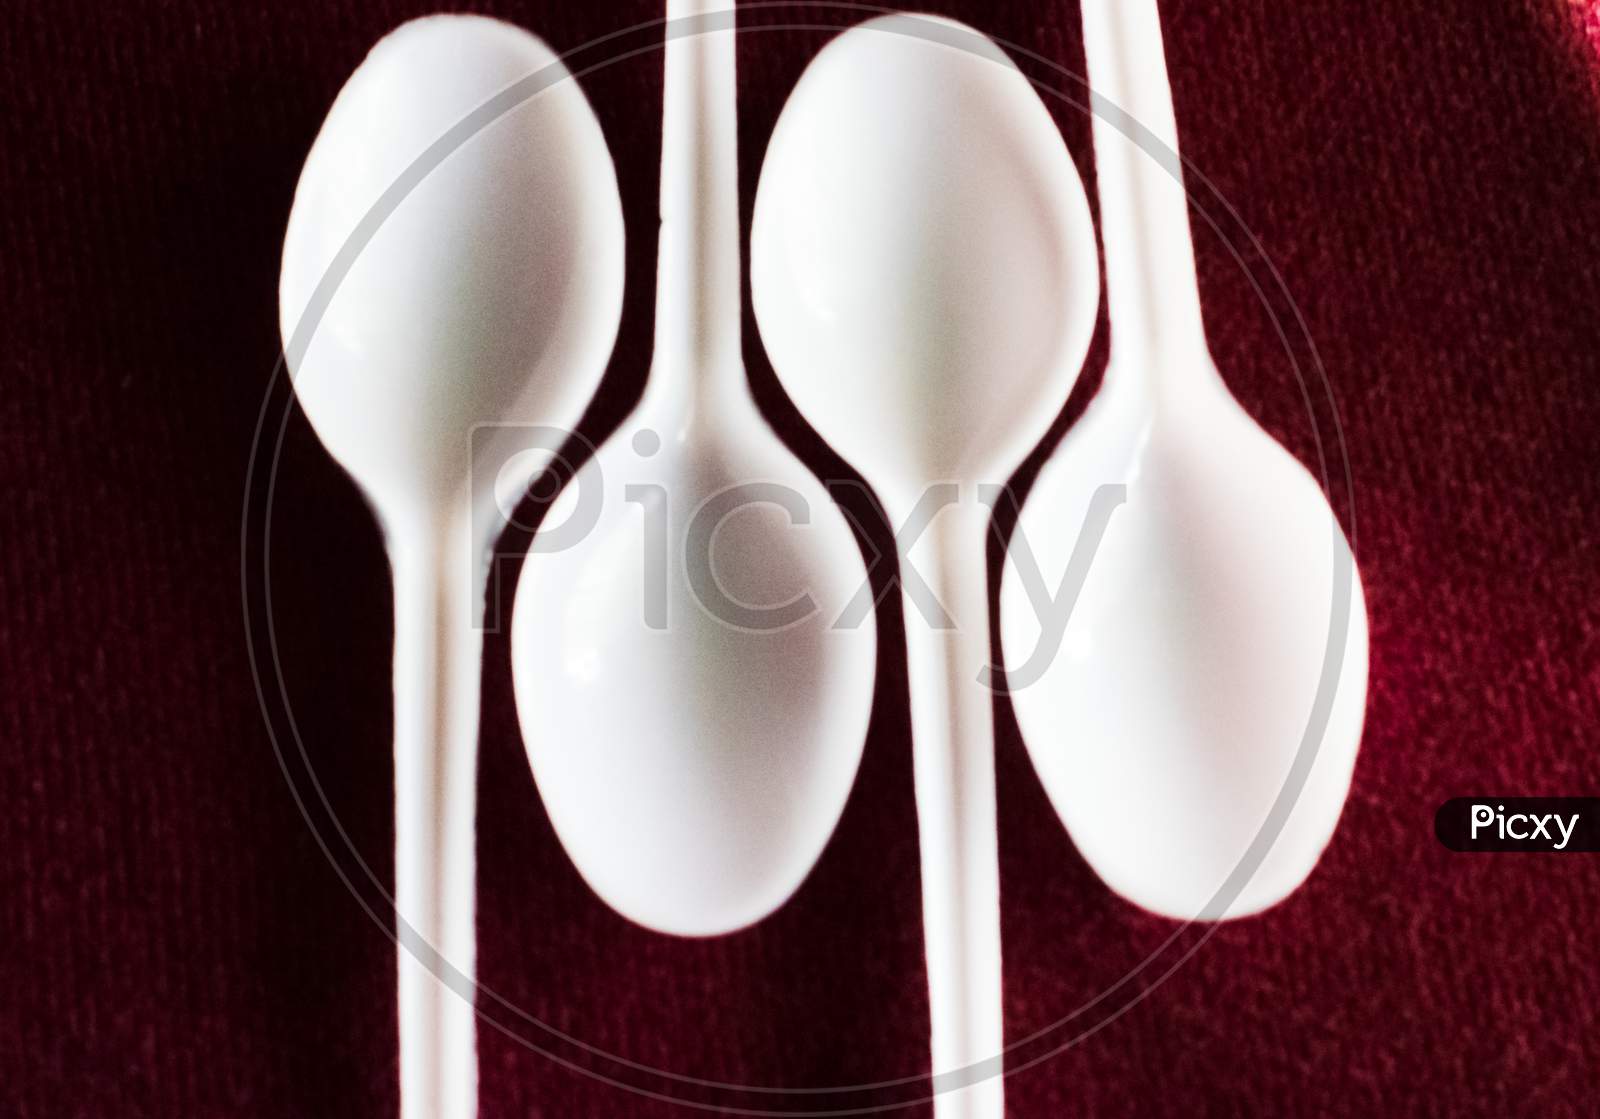 Some Empty Plastic Spoon In A Red Carpet